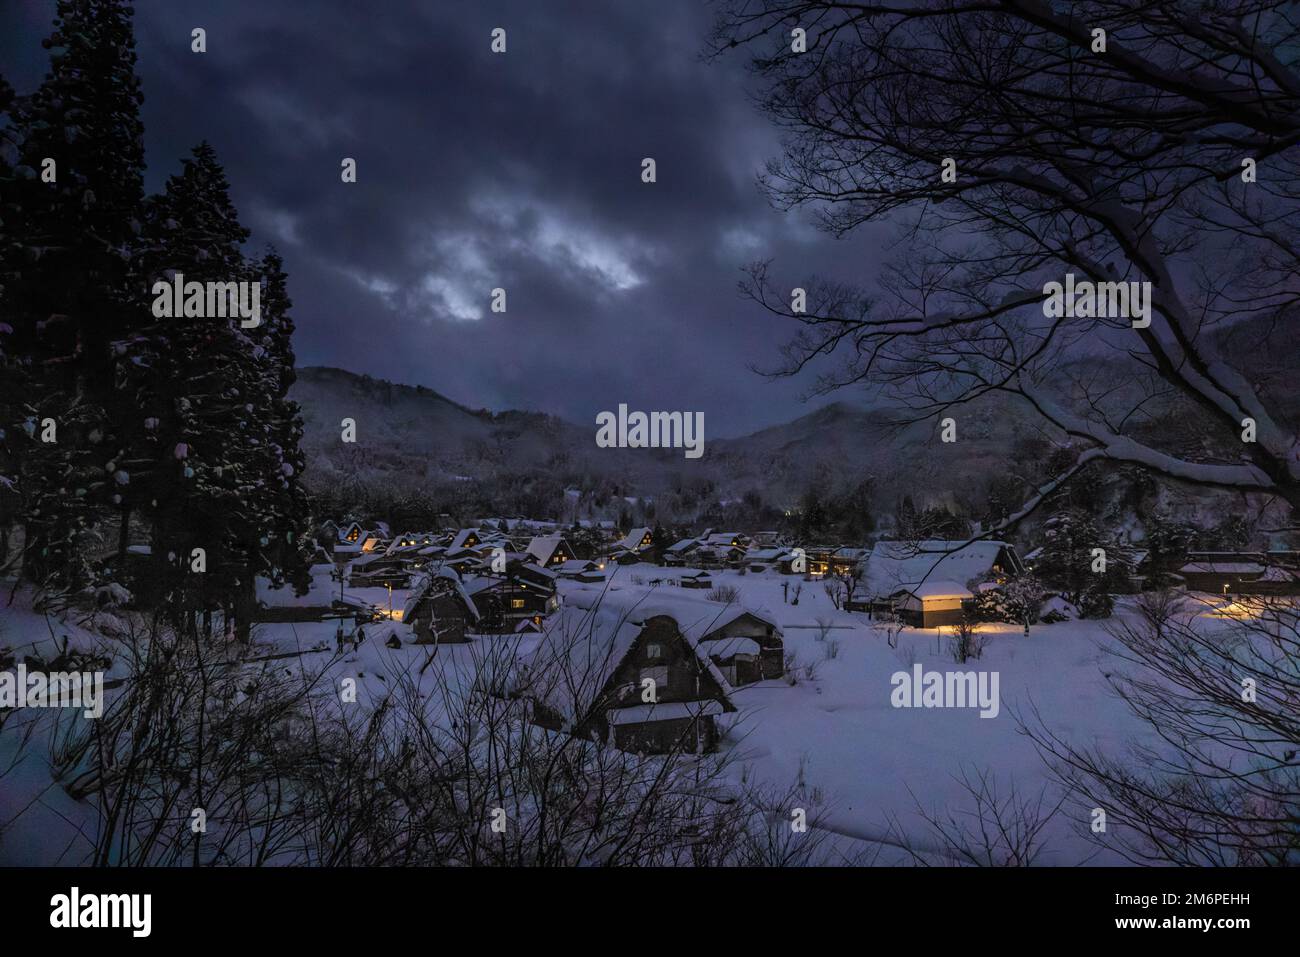 Lights from houses in traditional farming village in snowy valley at dusk Stock Photo